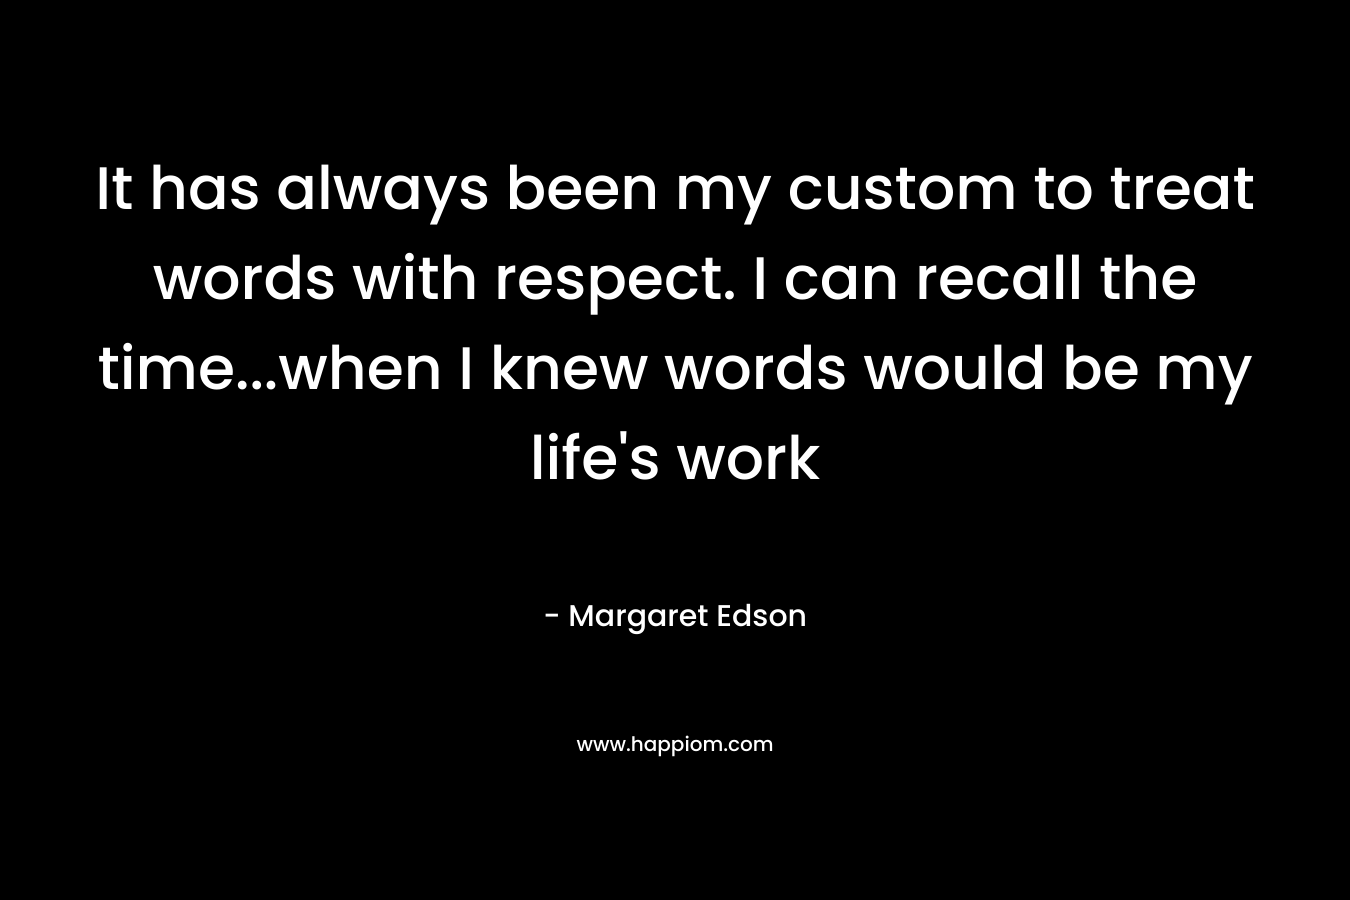 It has always been my custom to treat words with respect. I can recall the time…when I knew words would be my life’s work – Margaret Edson